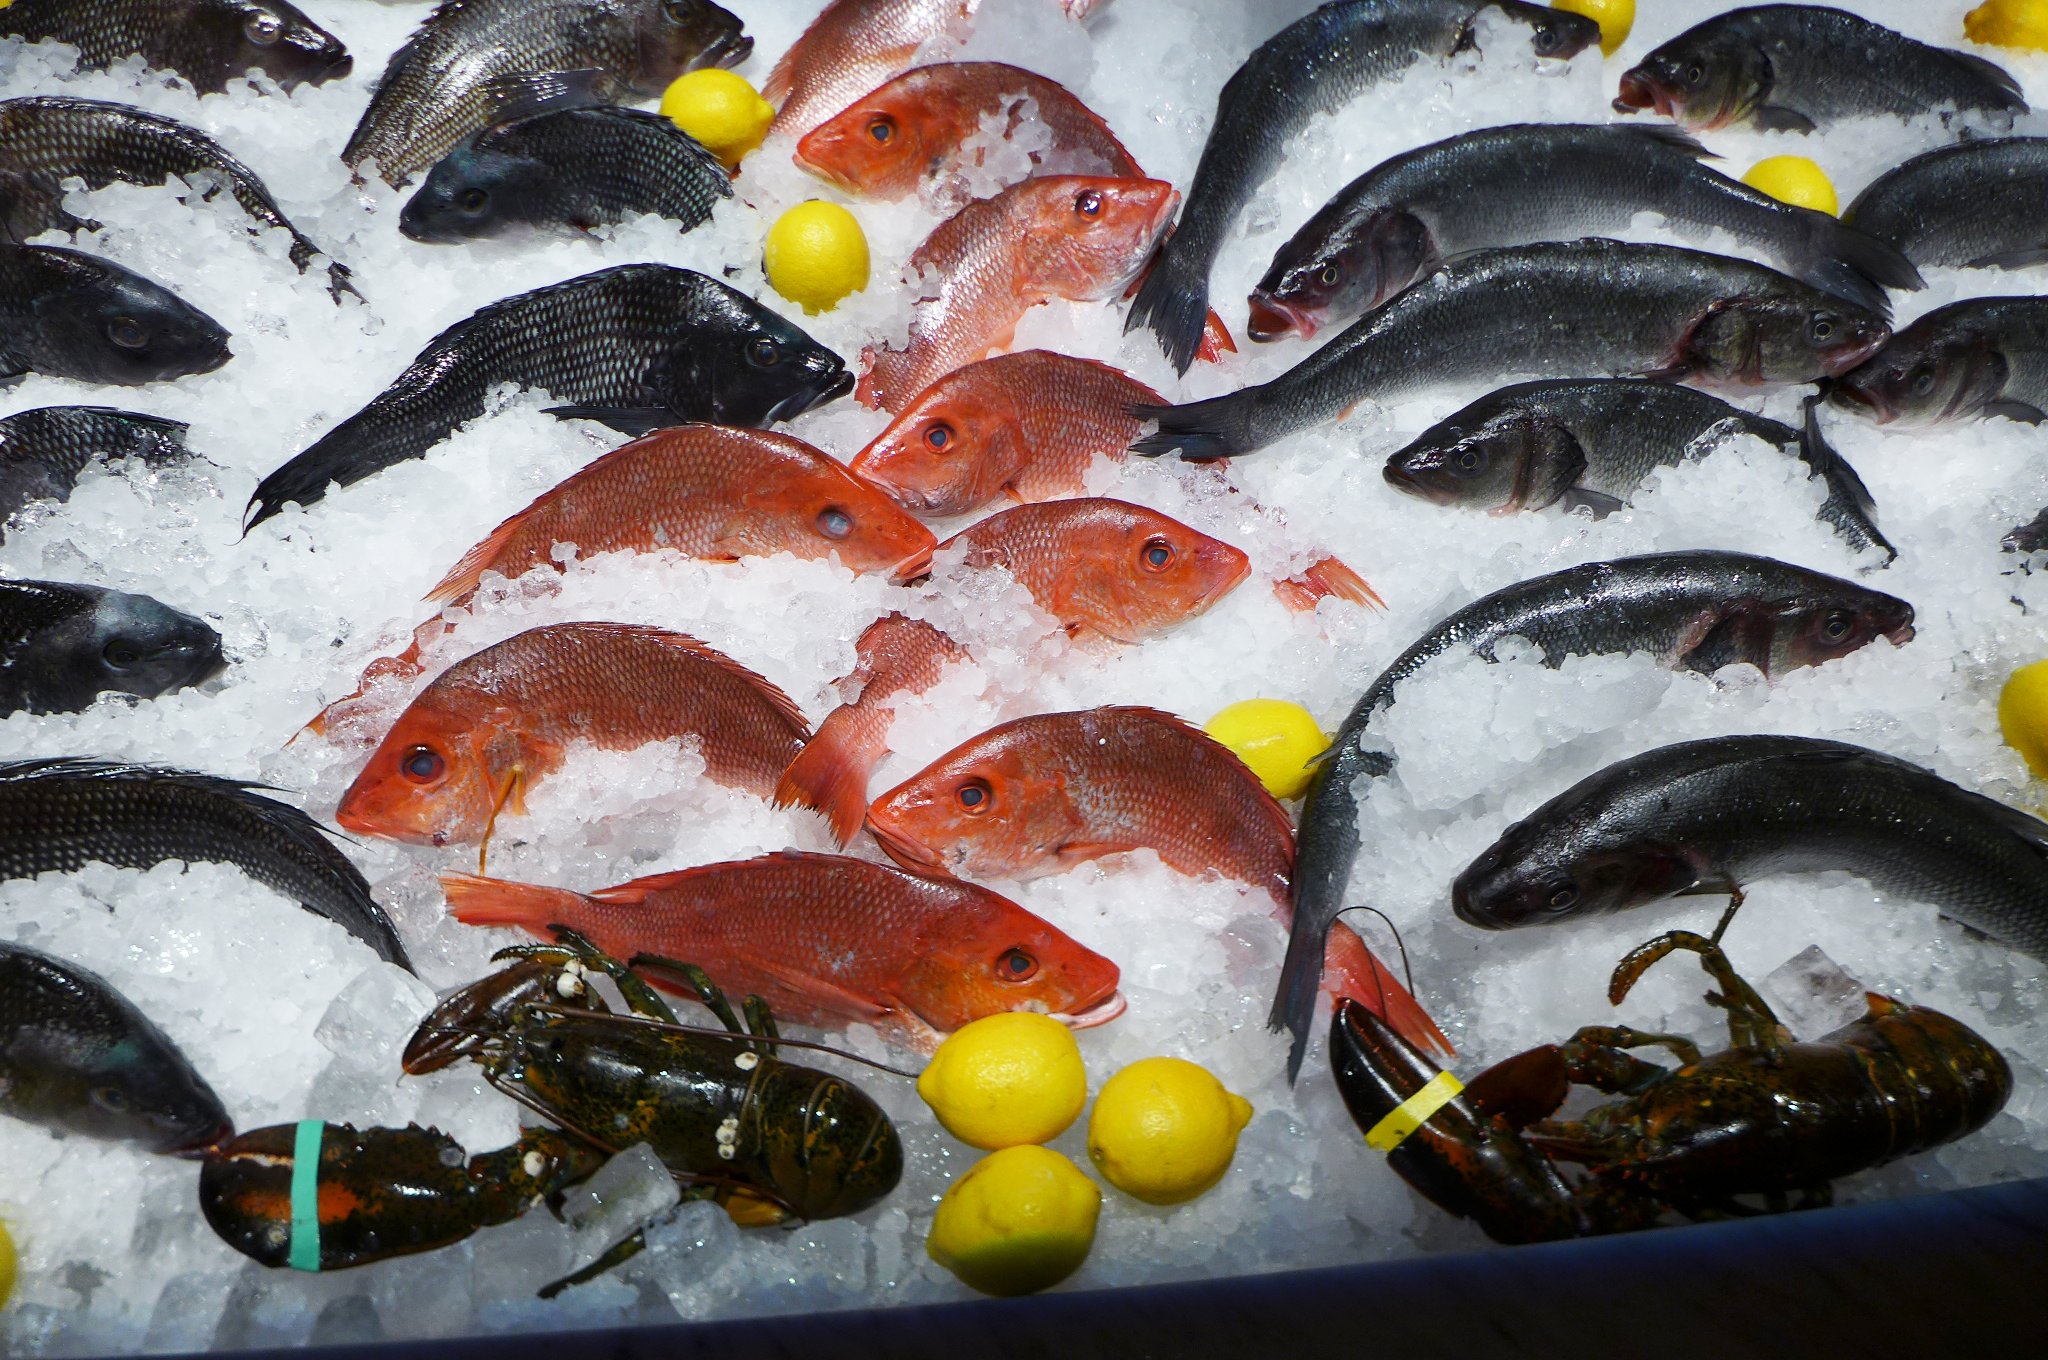 Your choice of whole fish at Kyma includes five species.